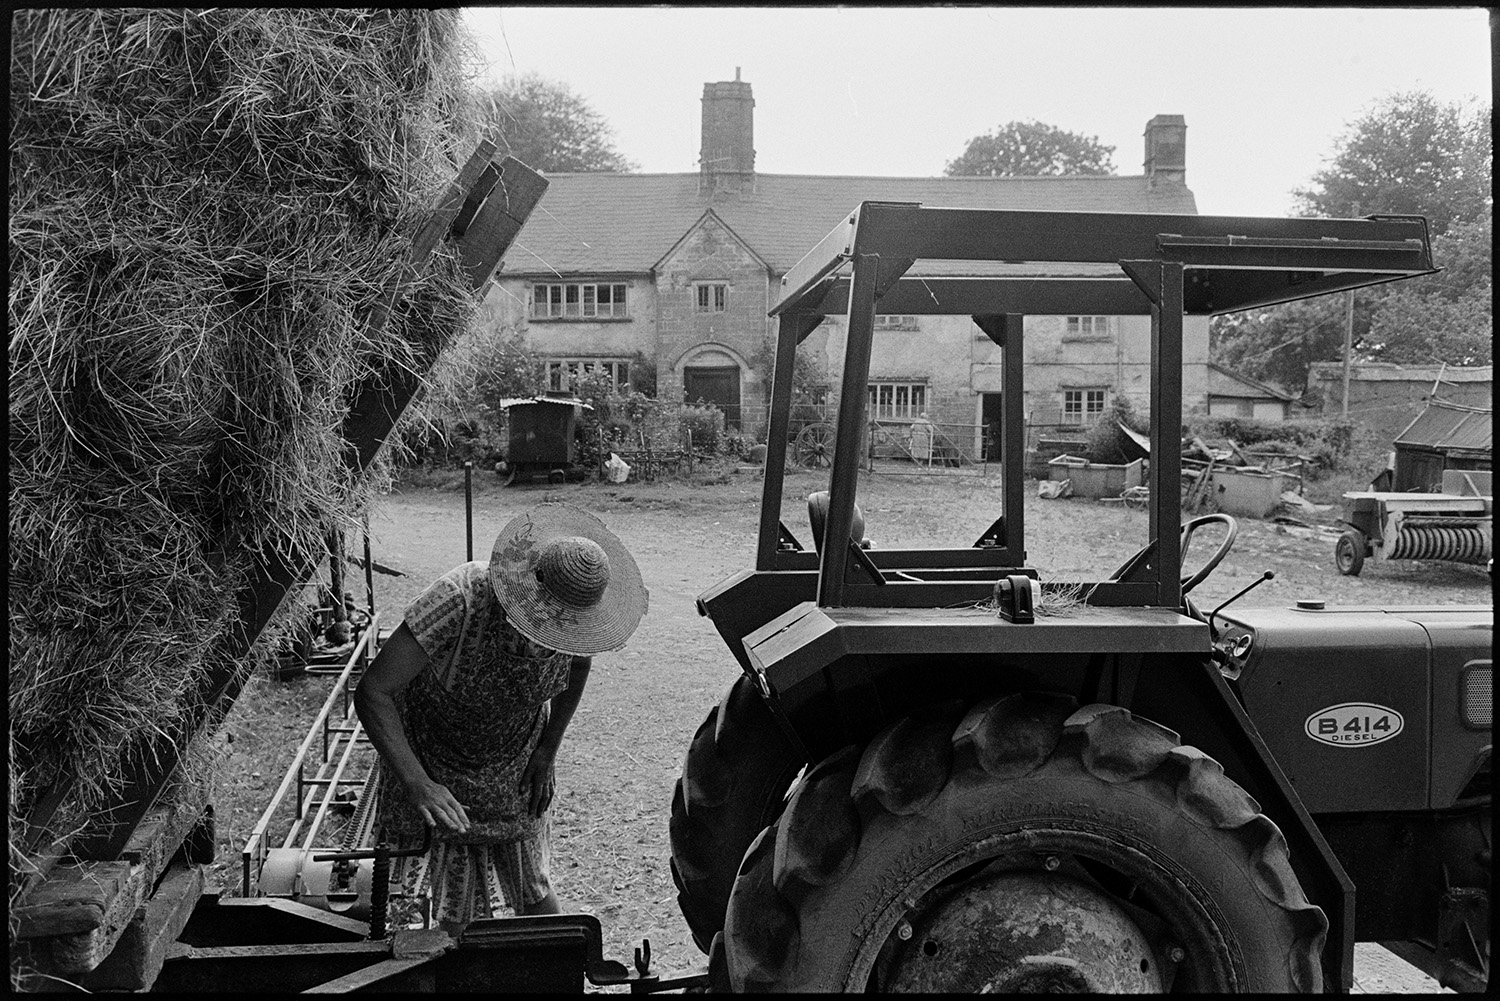 Farming family setting off to bring in the hay on trailer. 
[Mrs Oke checking the connection between a tractor and trailer in the farmyard at Deckport. Hatherleigh. The trailer is full of hay bales and the farmhouse can be seen in the background.]